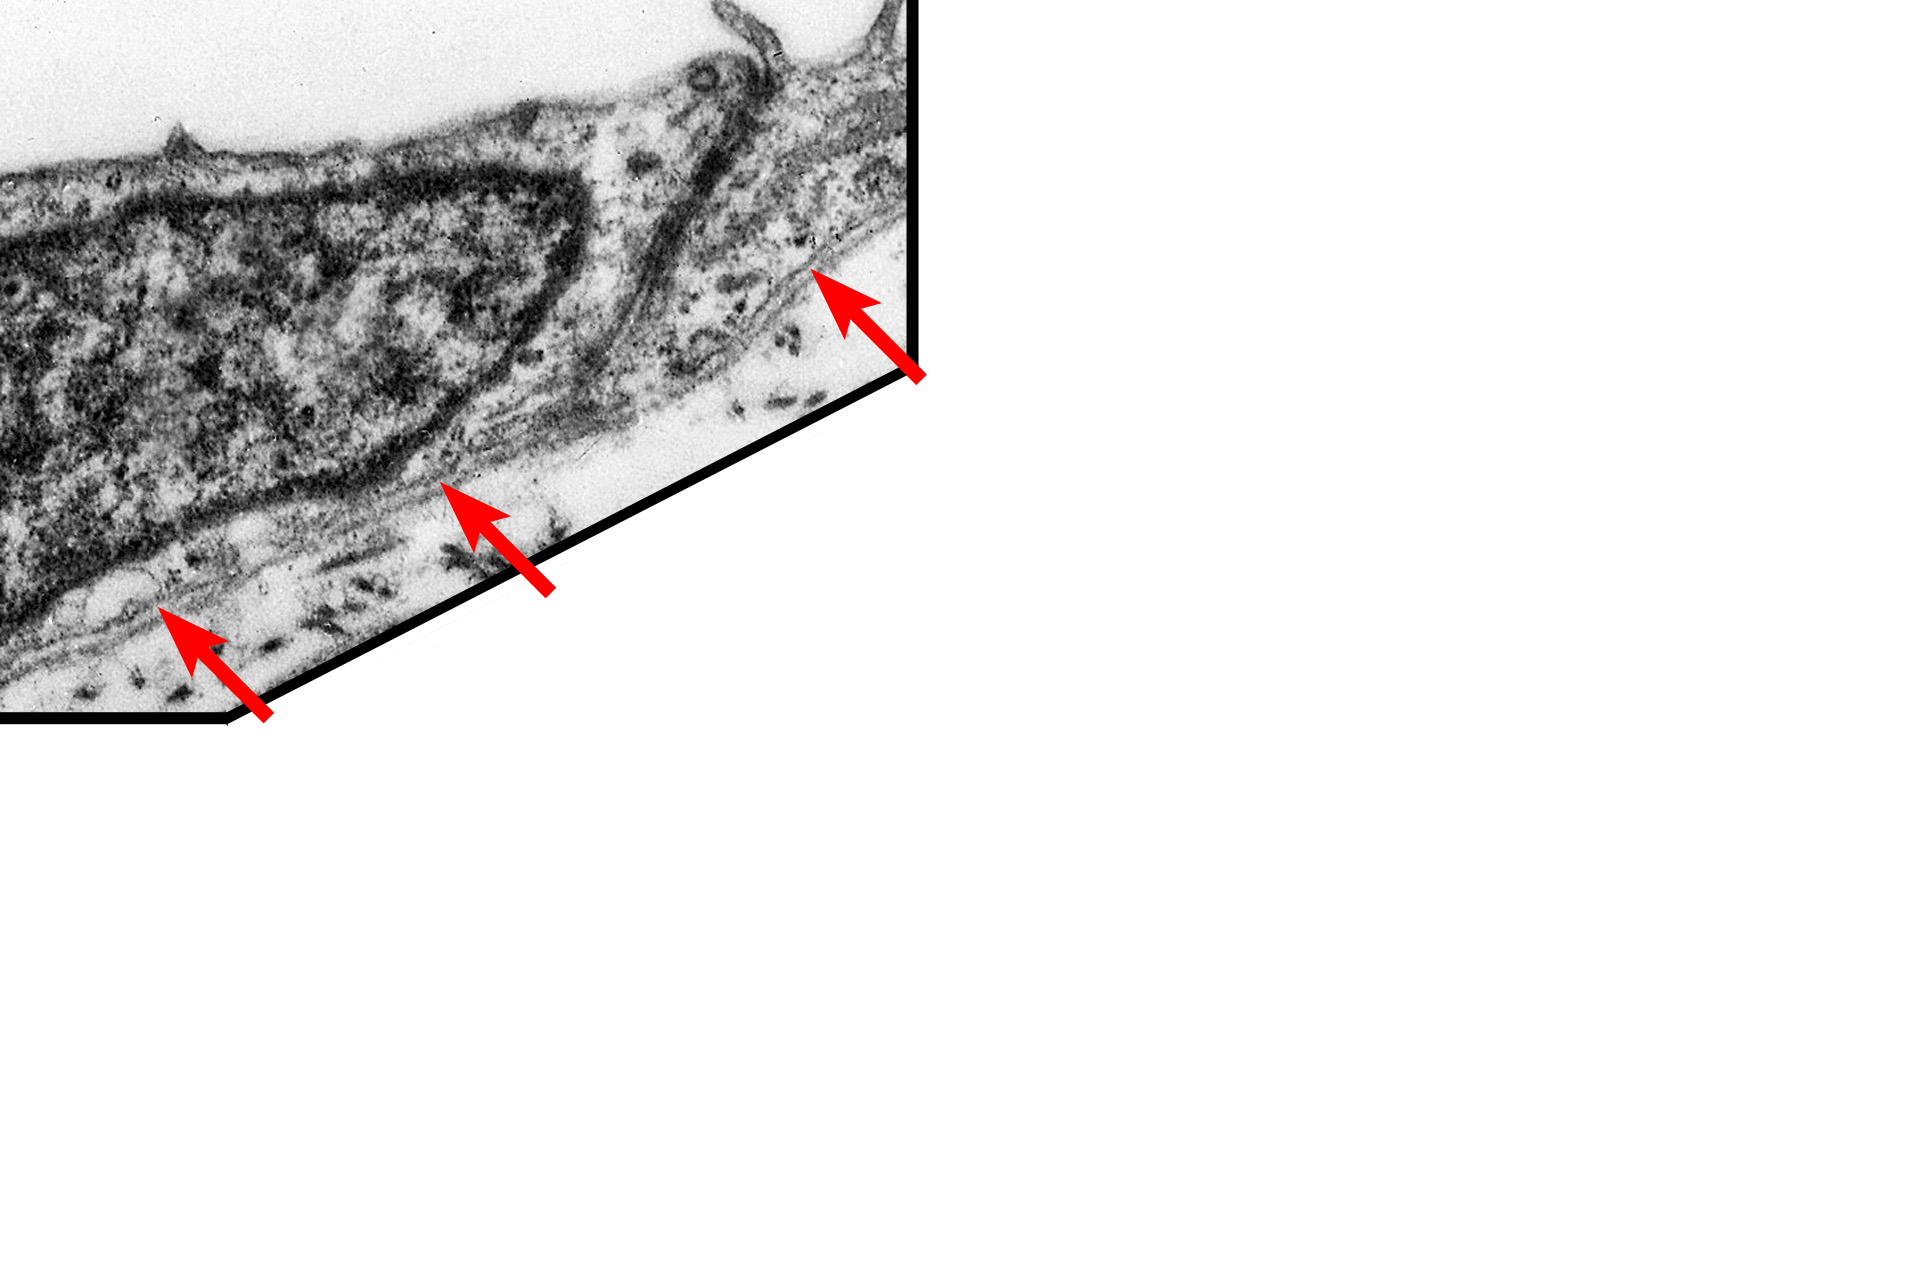 Lamina lucida <p>All epithelia rest on a basement membrane, which consists of two components, the basal lamina, secreted by epithelial cells, and a reticular lamina, secreted by fibroblasts in the underlying connective tissue.  The basal lamina is, in turn, subdivided into lamina lucida and lamina densa.  Additional studies have shown that the presence of the lamina lucida results from a fixation-shrinkage artifact of the tissue.  The clear space does not exist in life and thus the lamina densa lies directly adjacent to the plasma membrane.  Serosa  15,000x</p>
